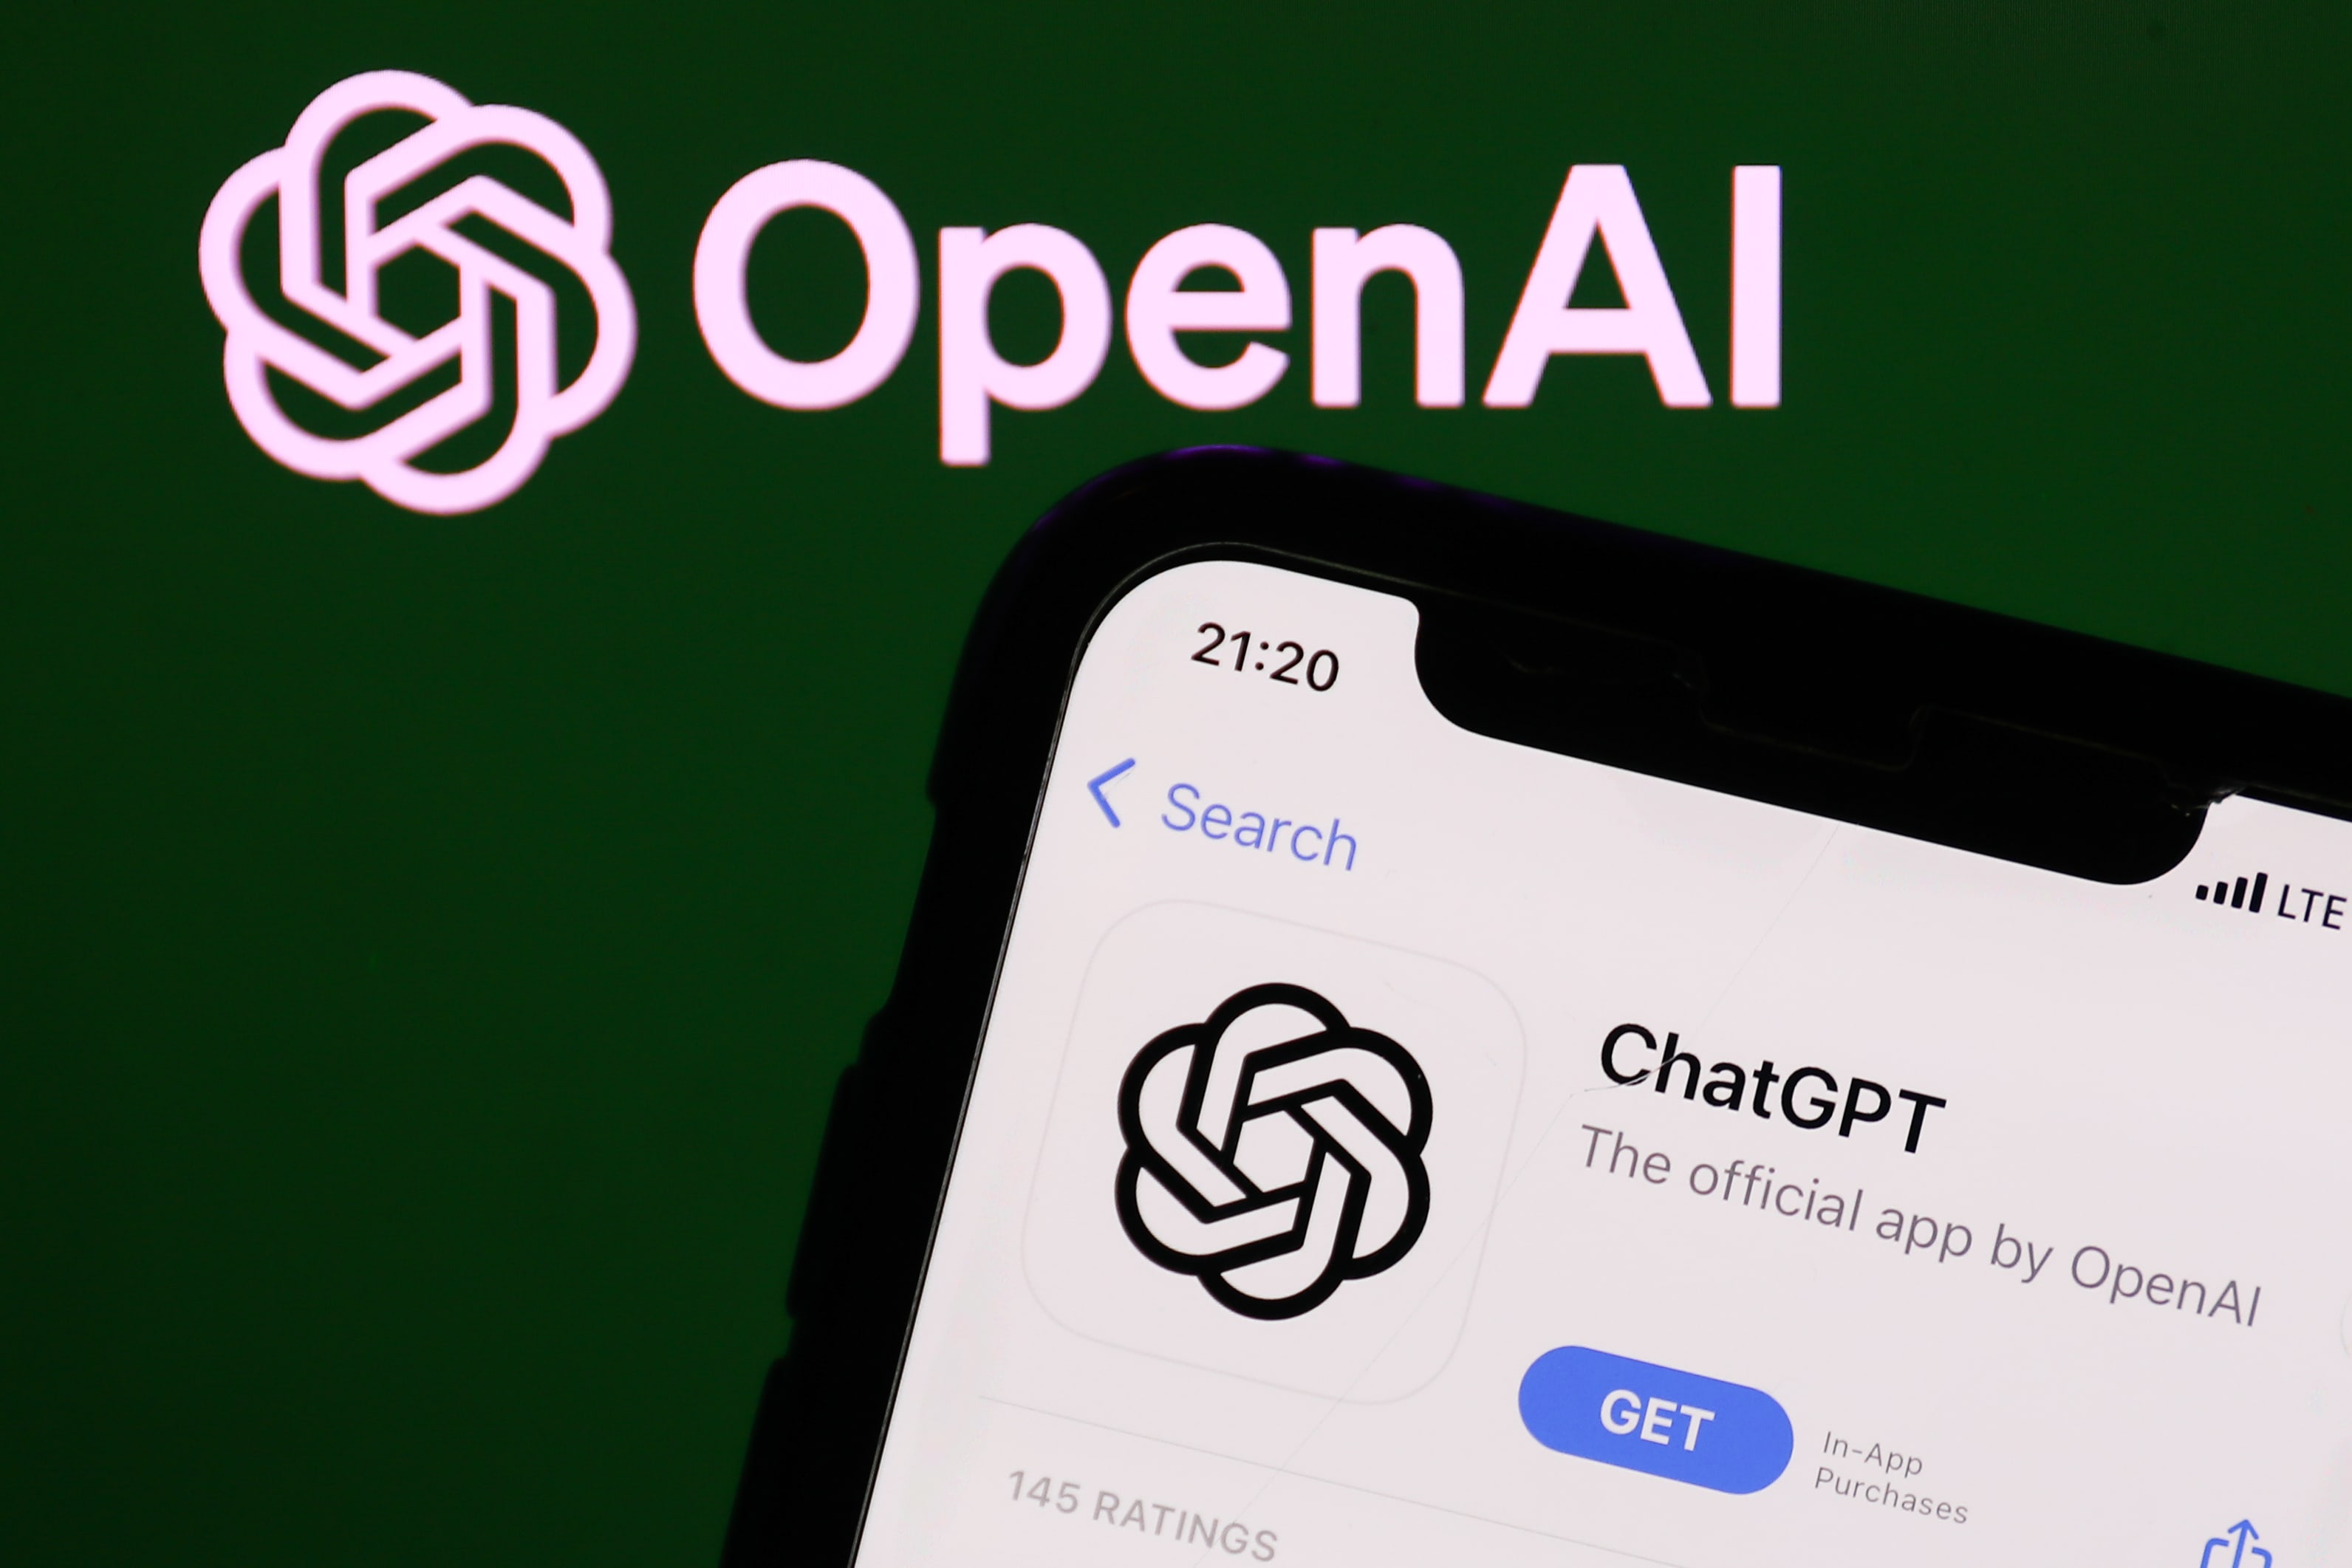 OpenAI, makers of ChatGPT, unveils tool that instantly makes short
videos from written commands